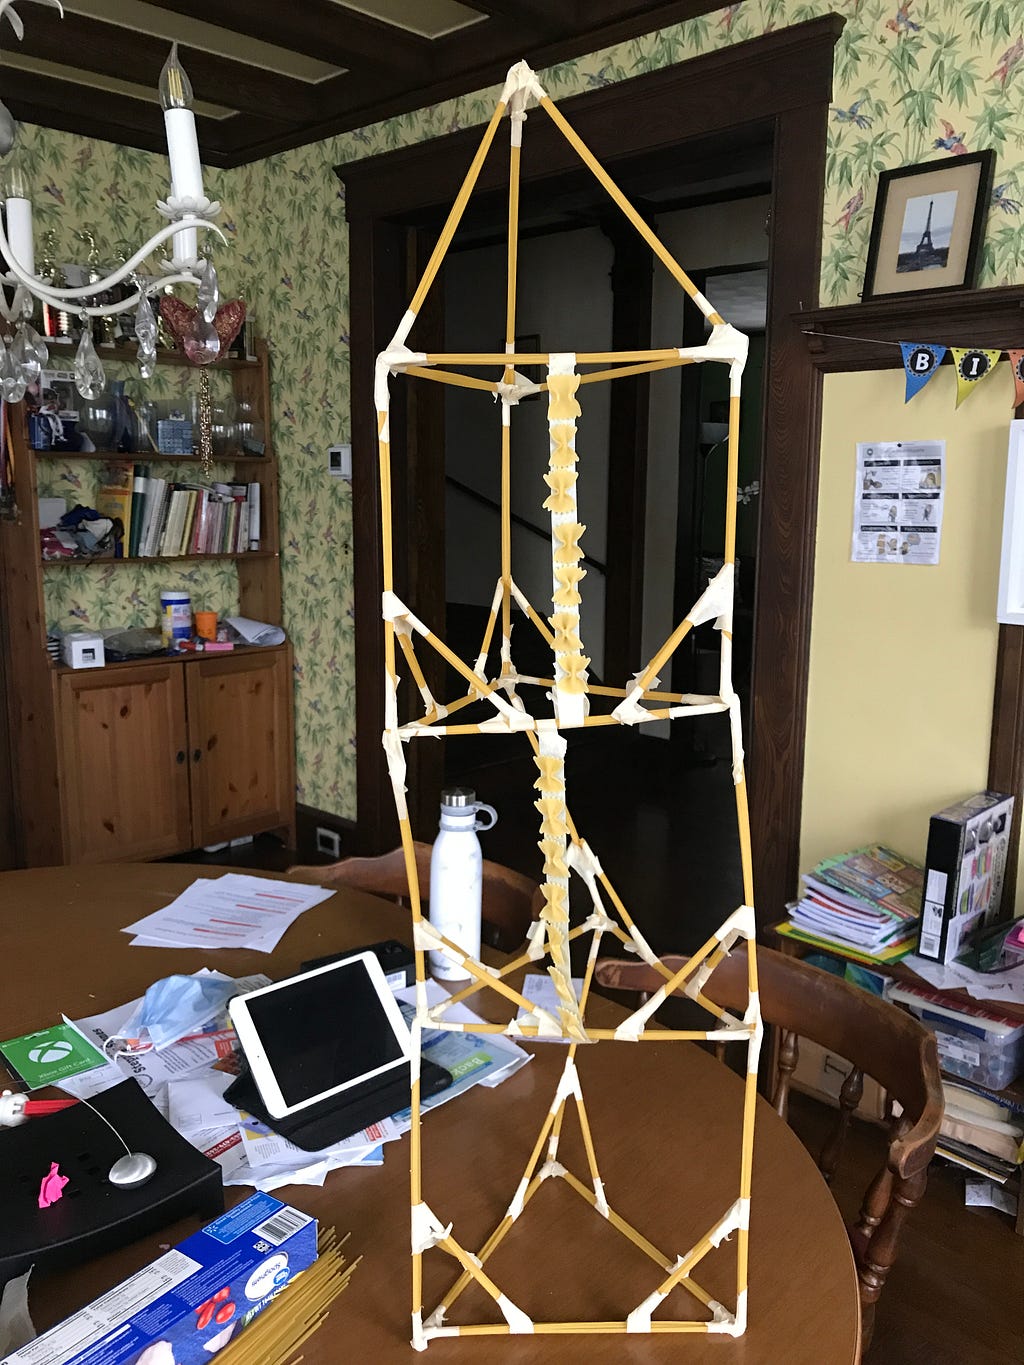 A spaghetti tower built as part of the Funbotics weekly engineering challenge